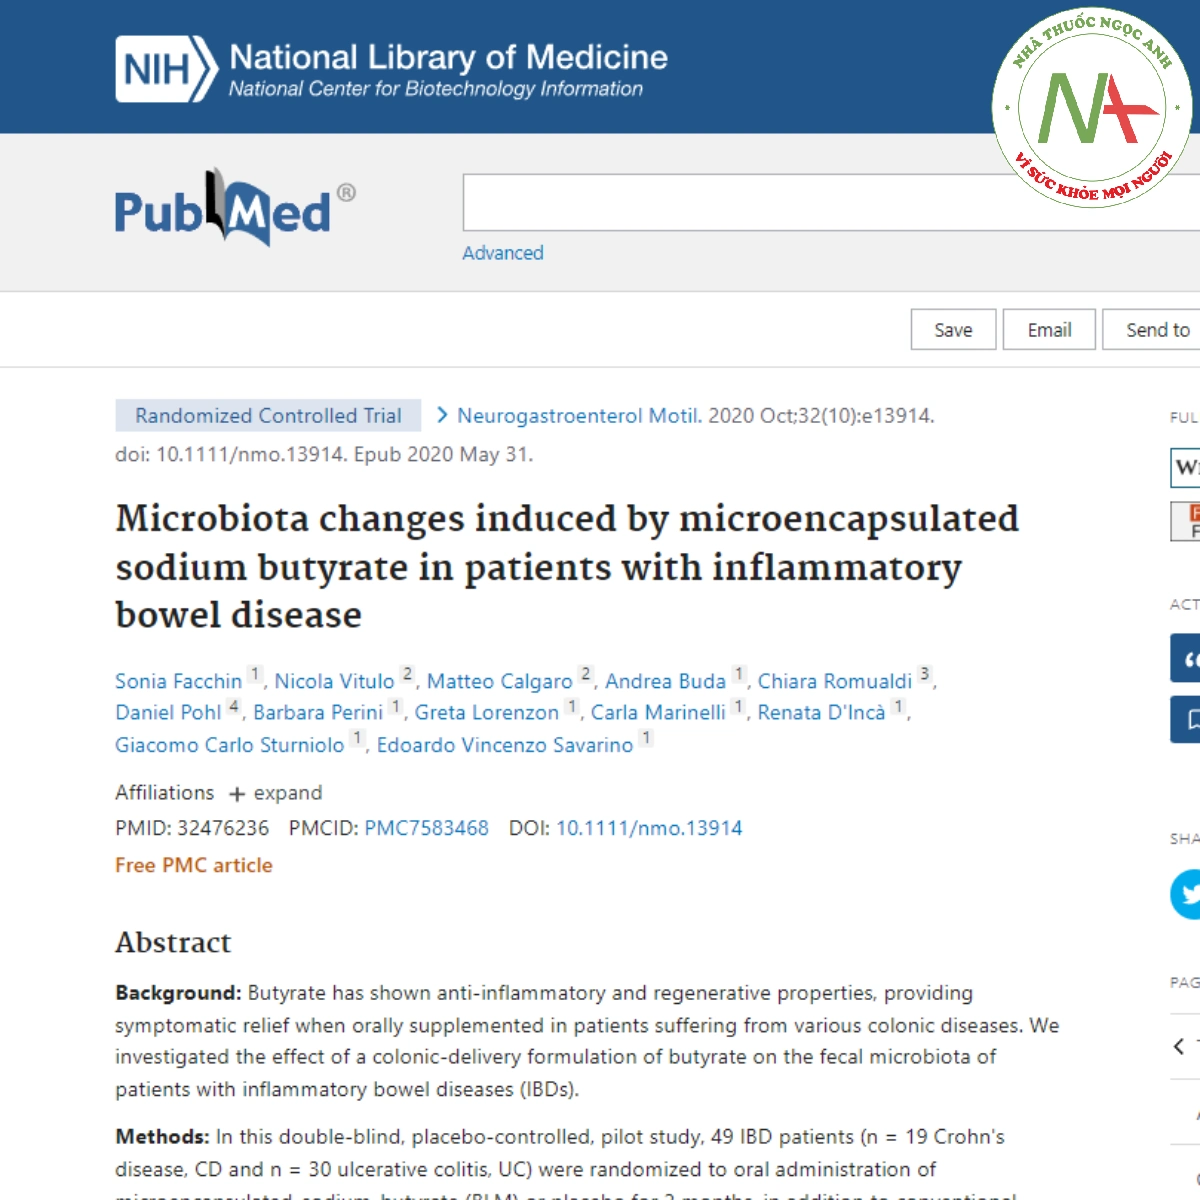 Microbiota changes induced by microencapsulated sodium butyrate in patients with inflammatory bowel disease